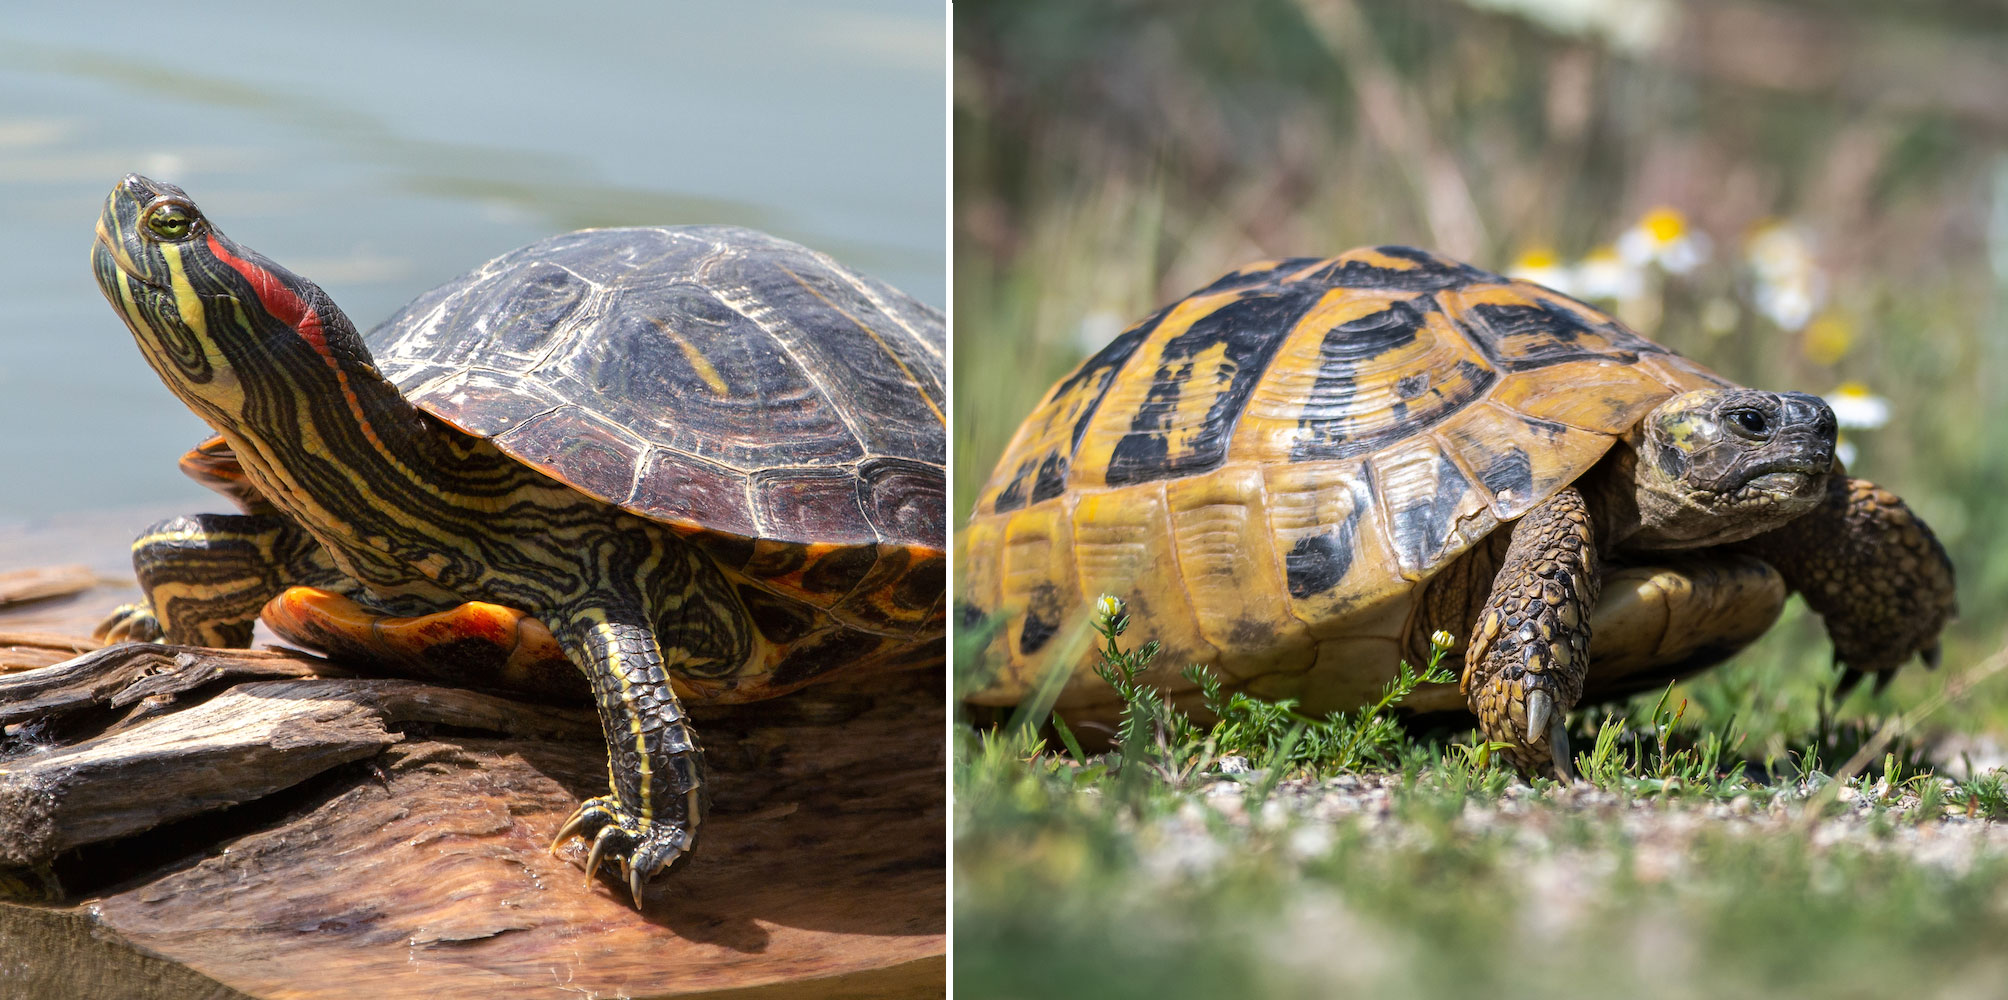 A side by side comparison of a turtle and a tortoise